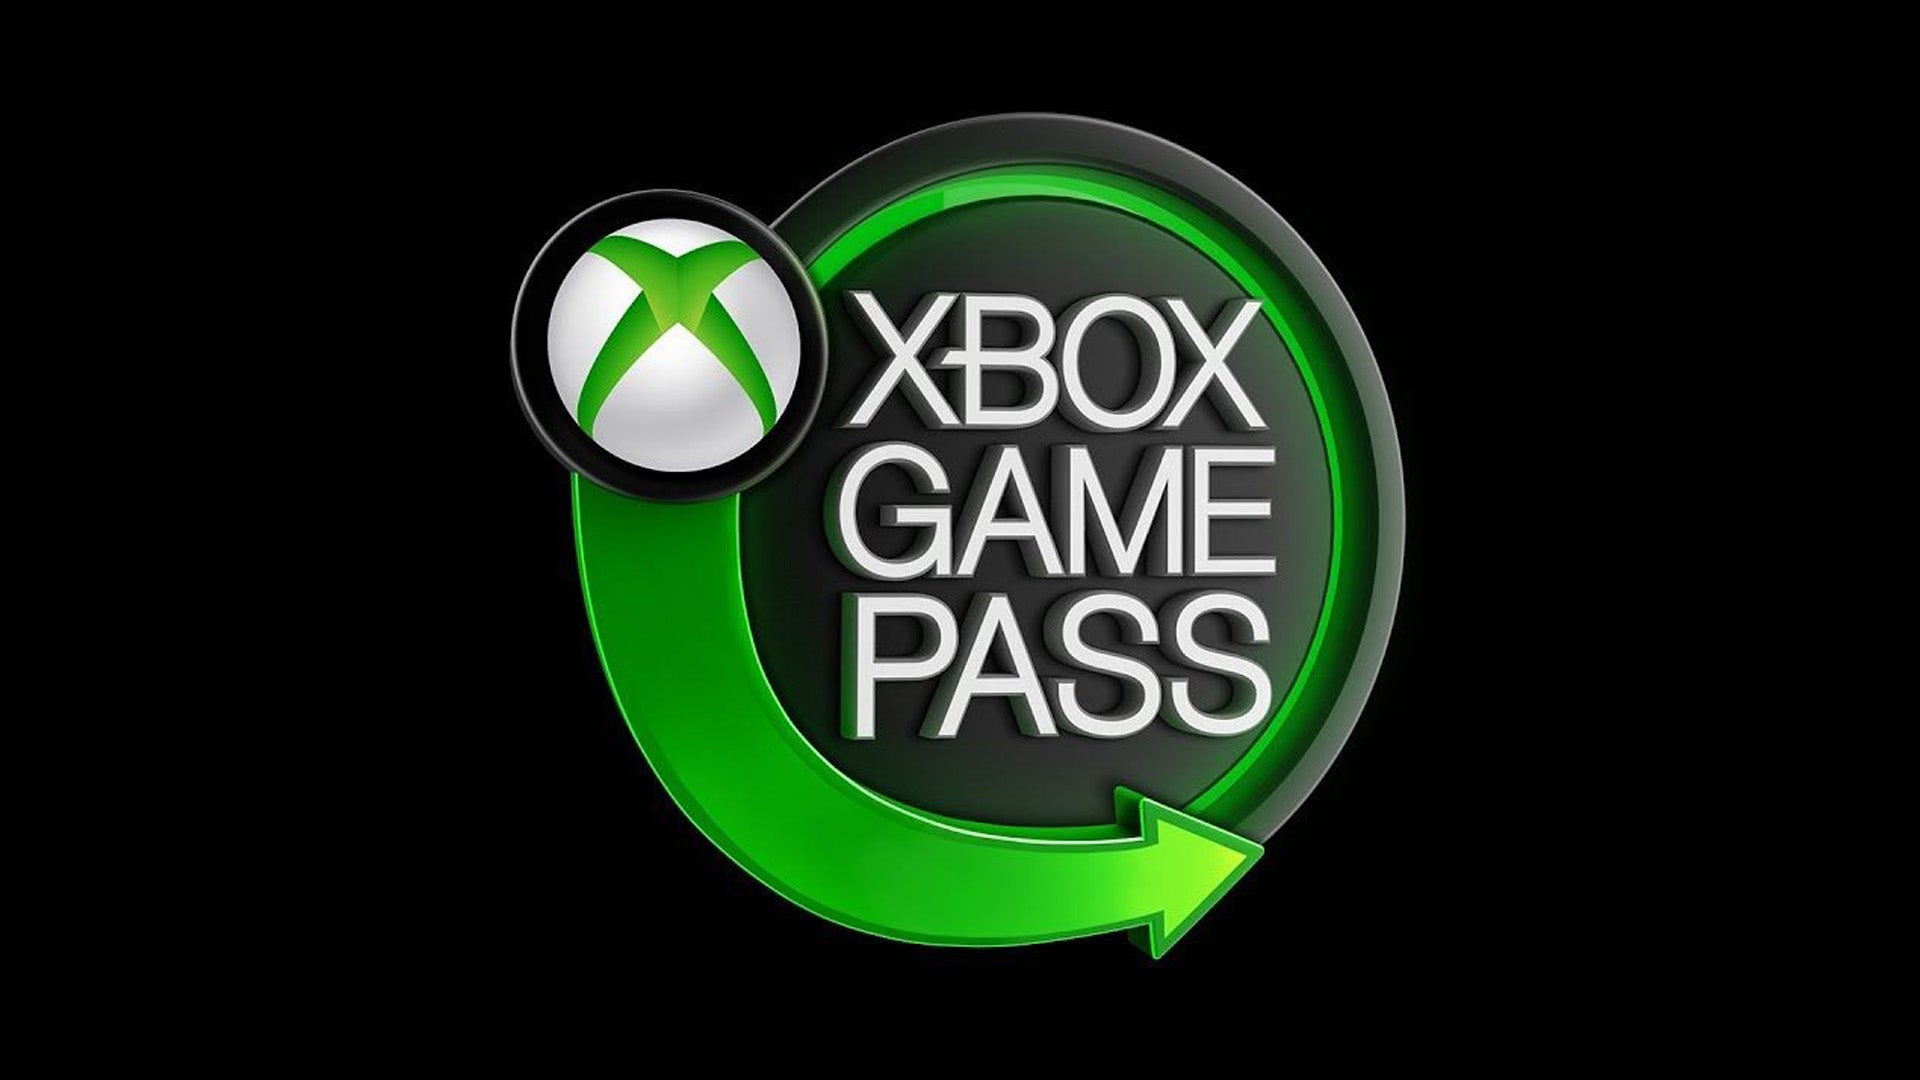 Image for Leaked Xbox Game Pass branding suggests family plan can be shared with friends too